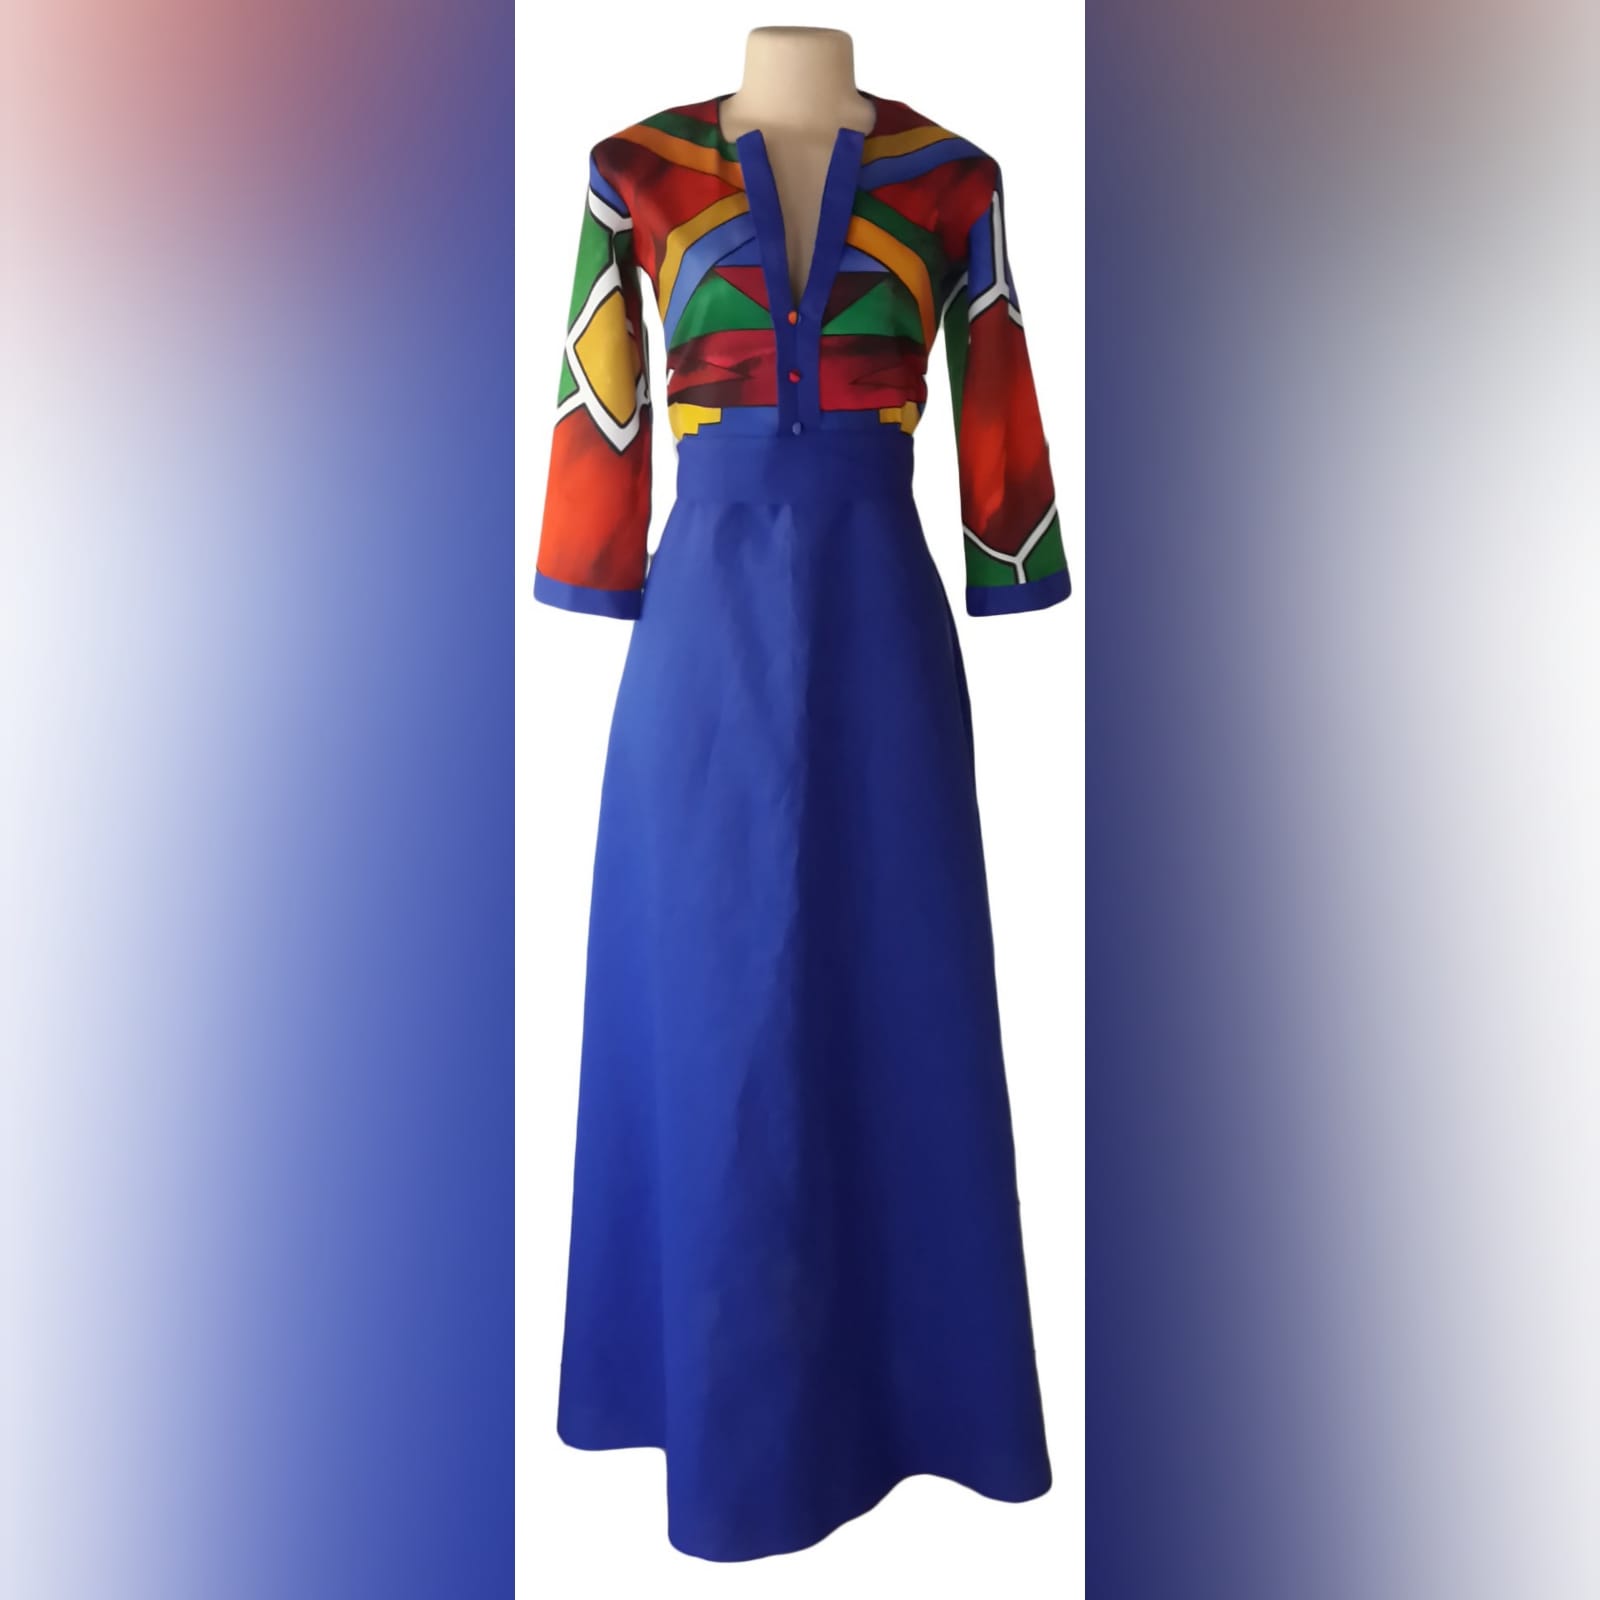 Royal blue ndebele dress and matching ndebele shirt 5 royal blue and ndebele empire fit dress. Bodice with ndebele print and 3/4 sleeves and an under bust belt. Mens matching ndebele shirt in royal blue. Traditional wedding attire.